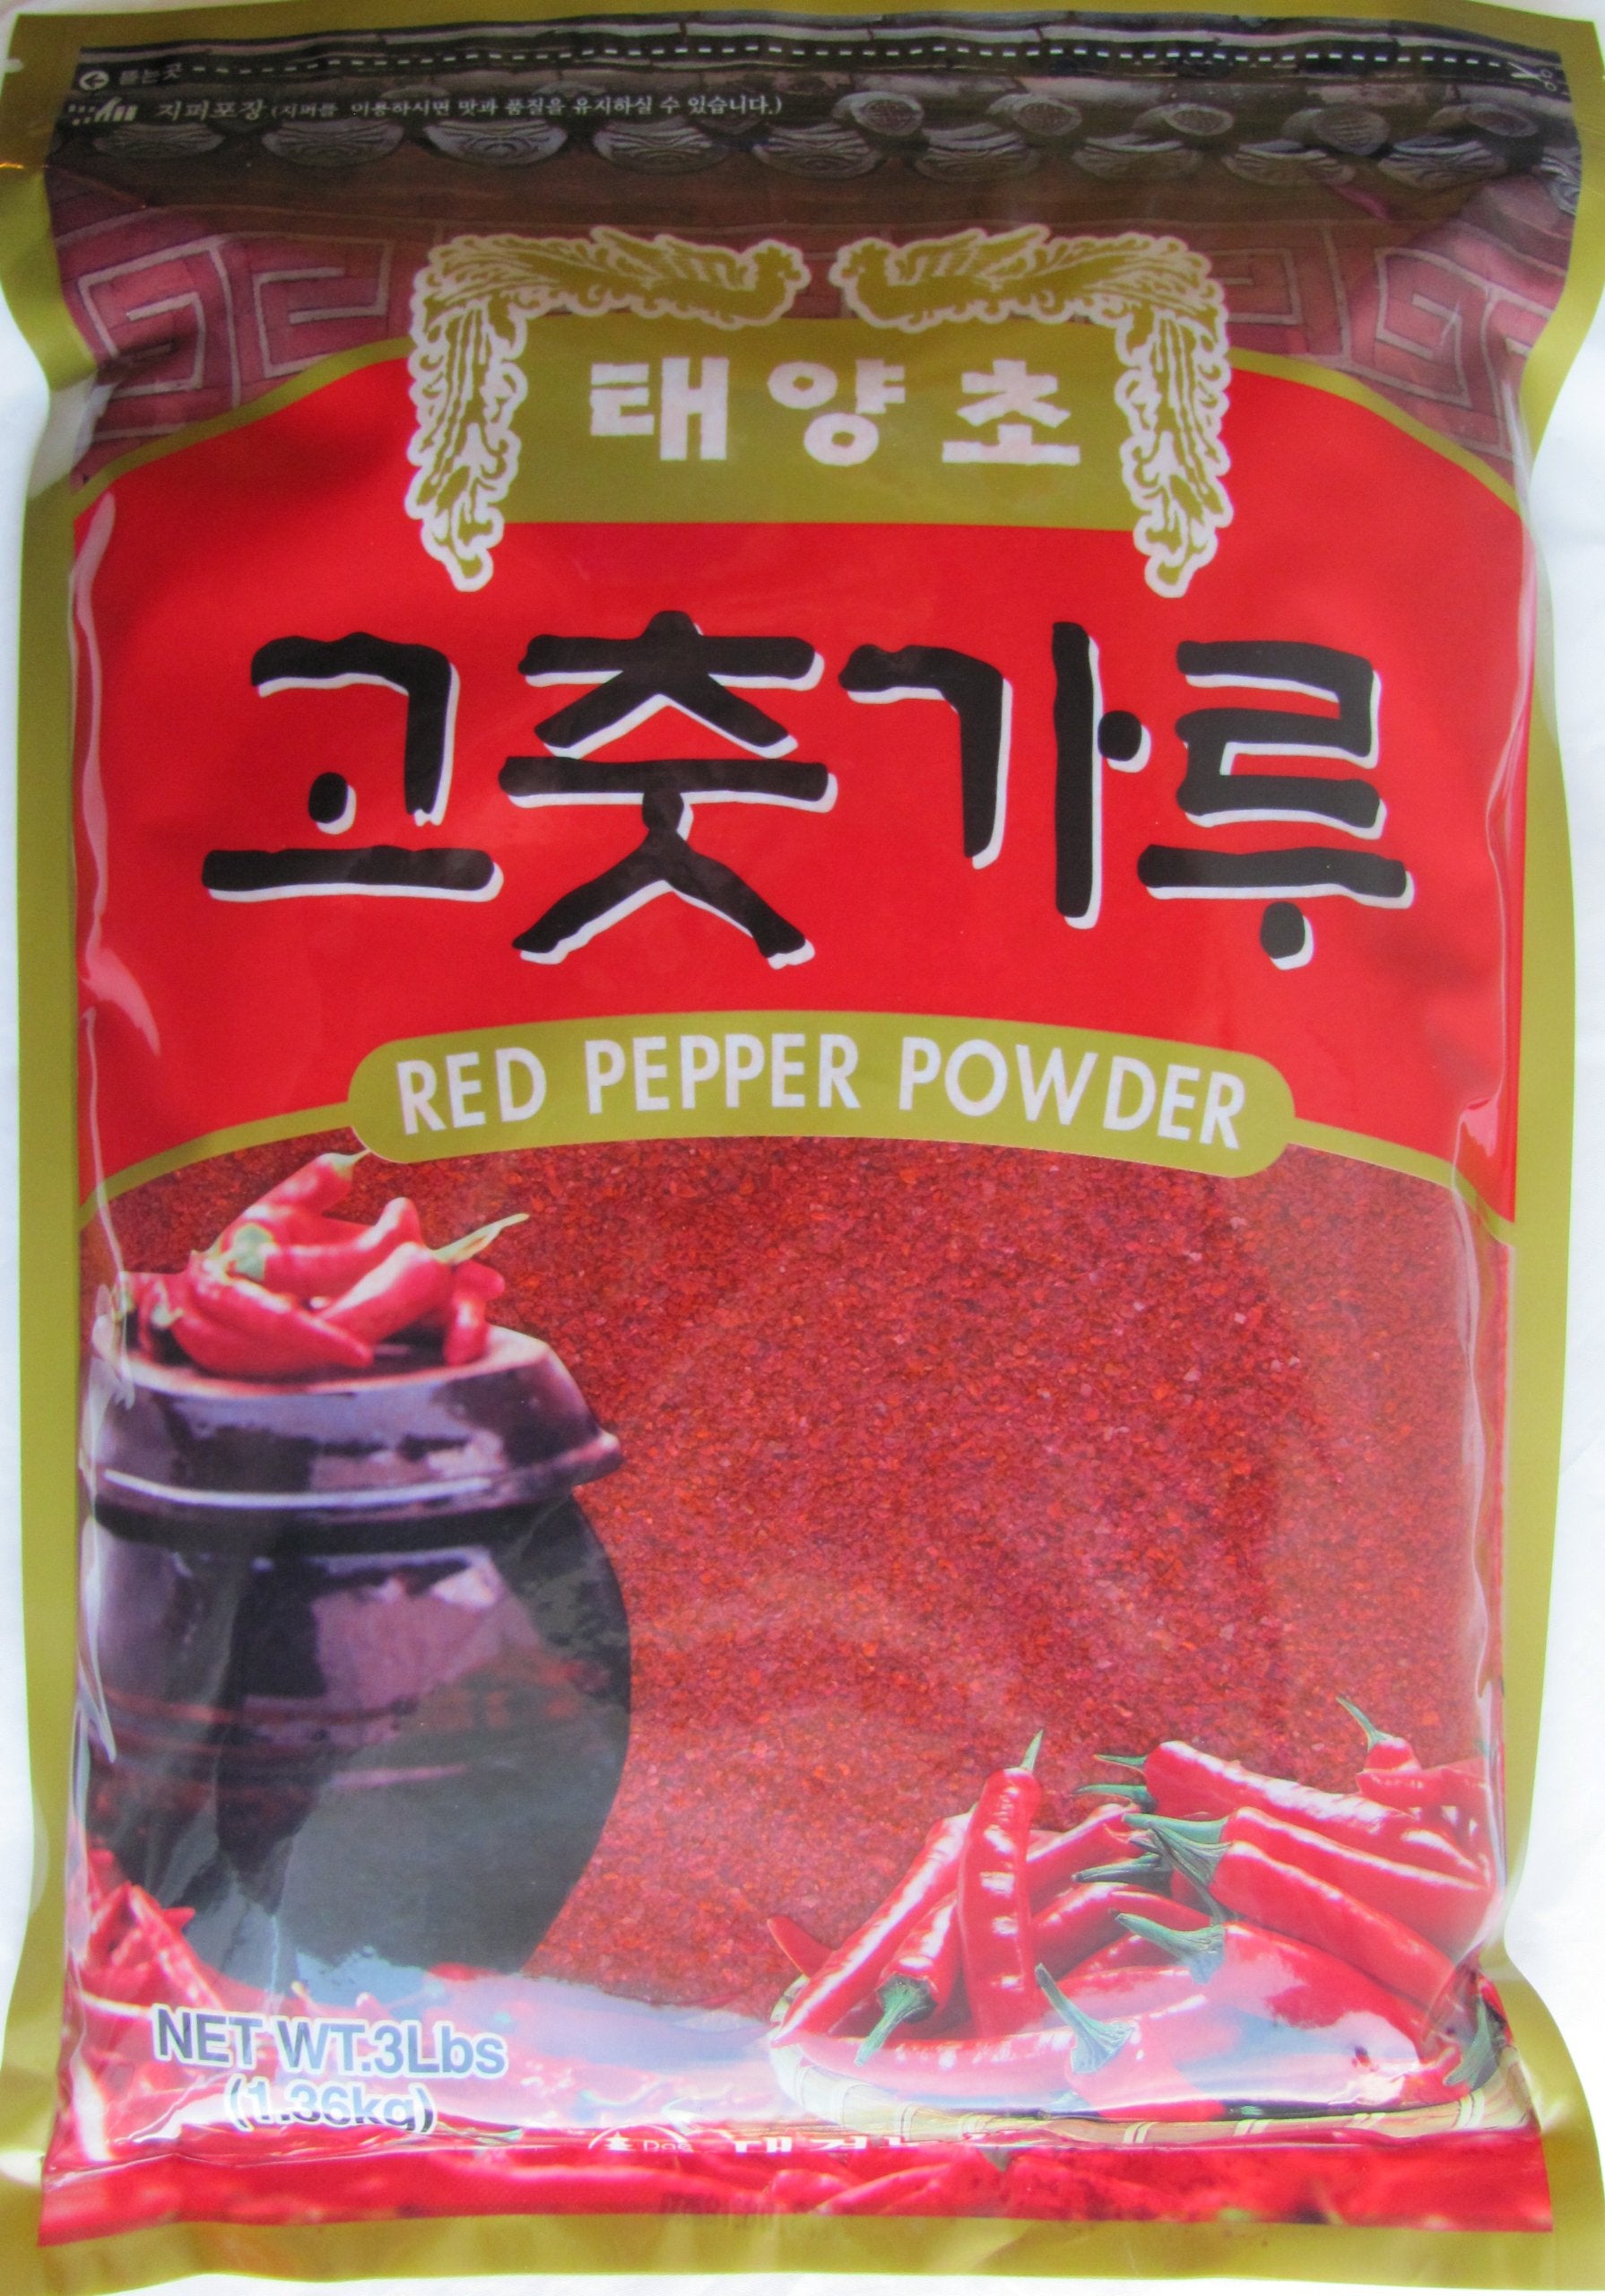 Dae Kyung Sun Baked Korean Red Pepper Coarse Powder, 3.0 Pounds